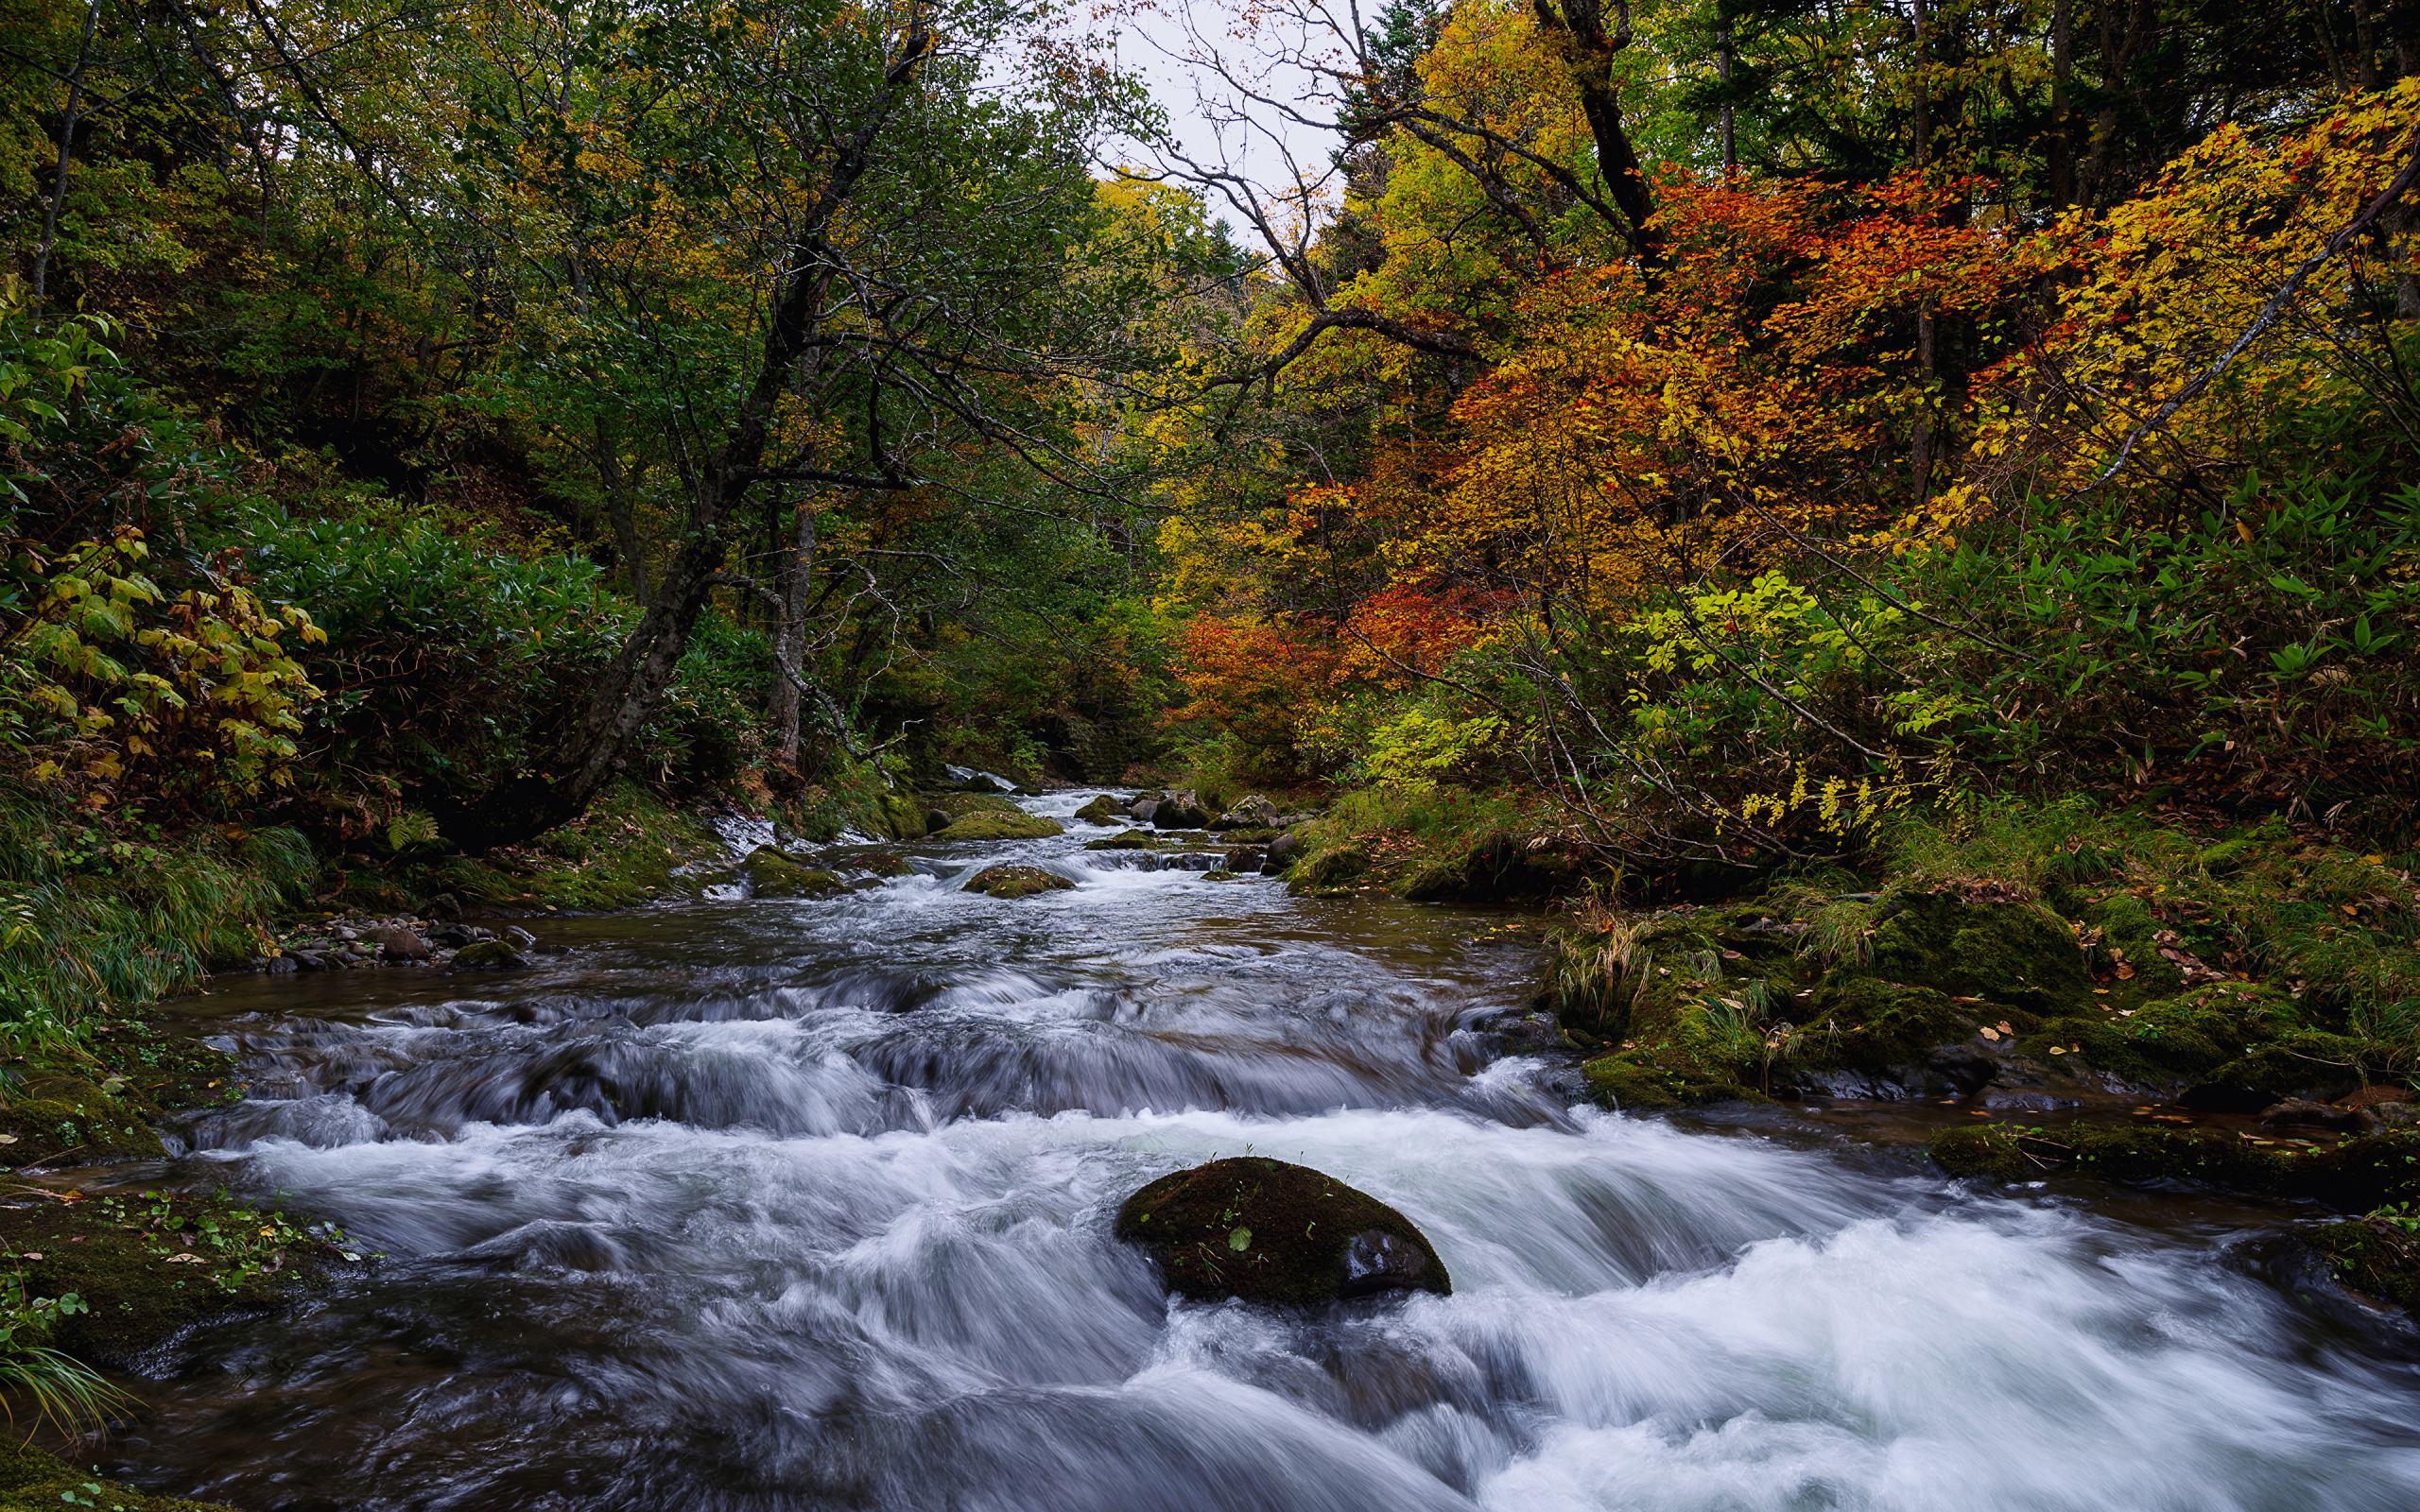 Fast water in a river in a forest in autumn